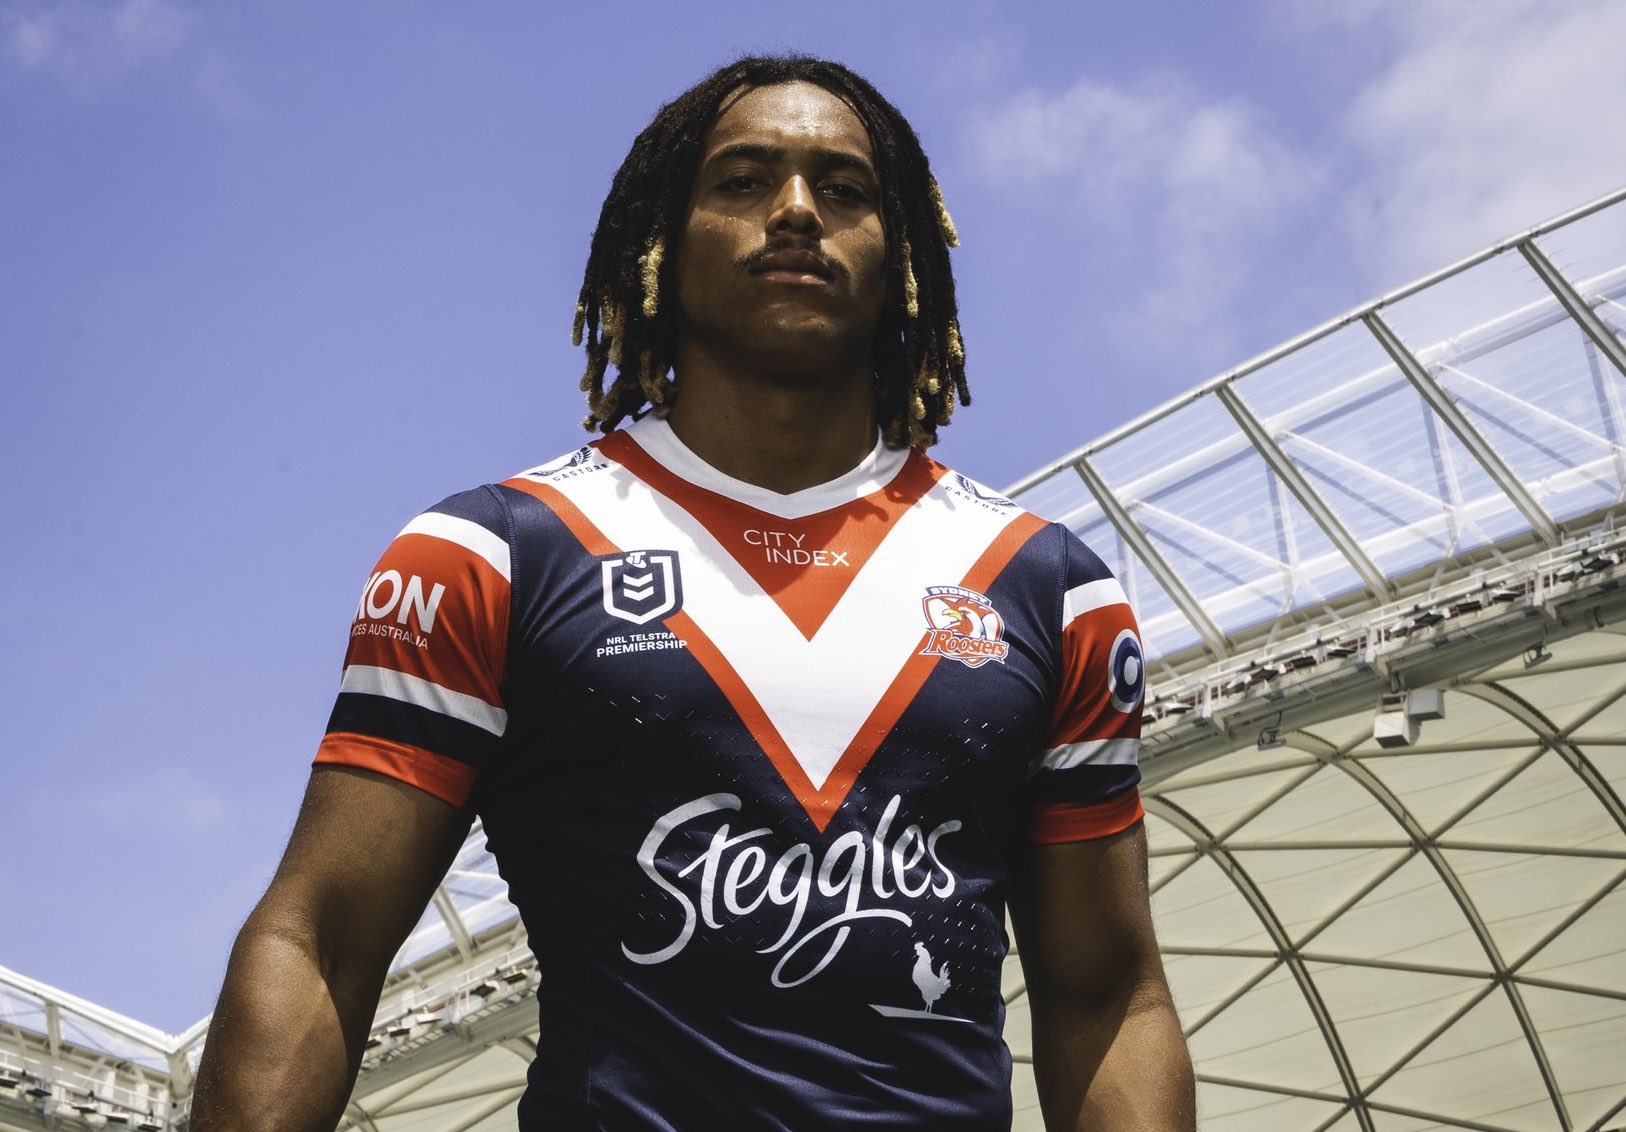 Young makes surprise appearance on flight to Vegas - NRL News - Zero Tackle